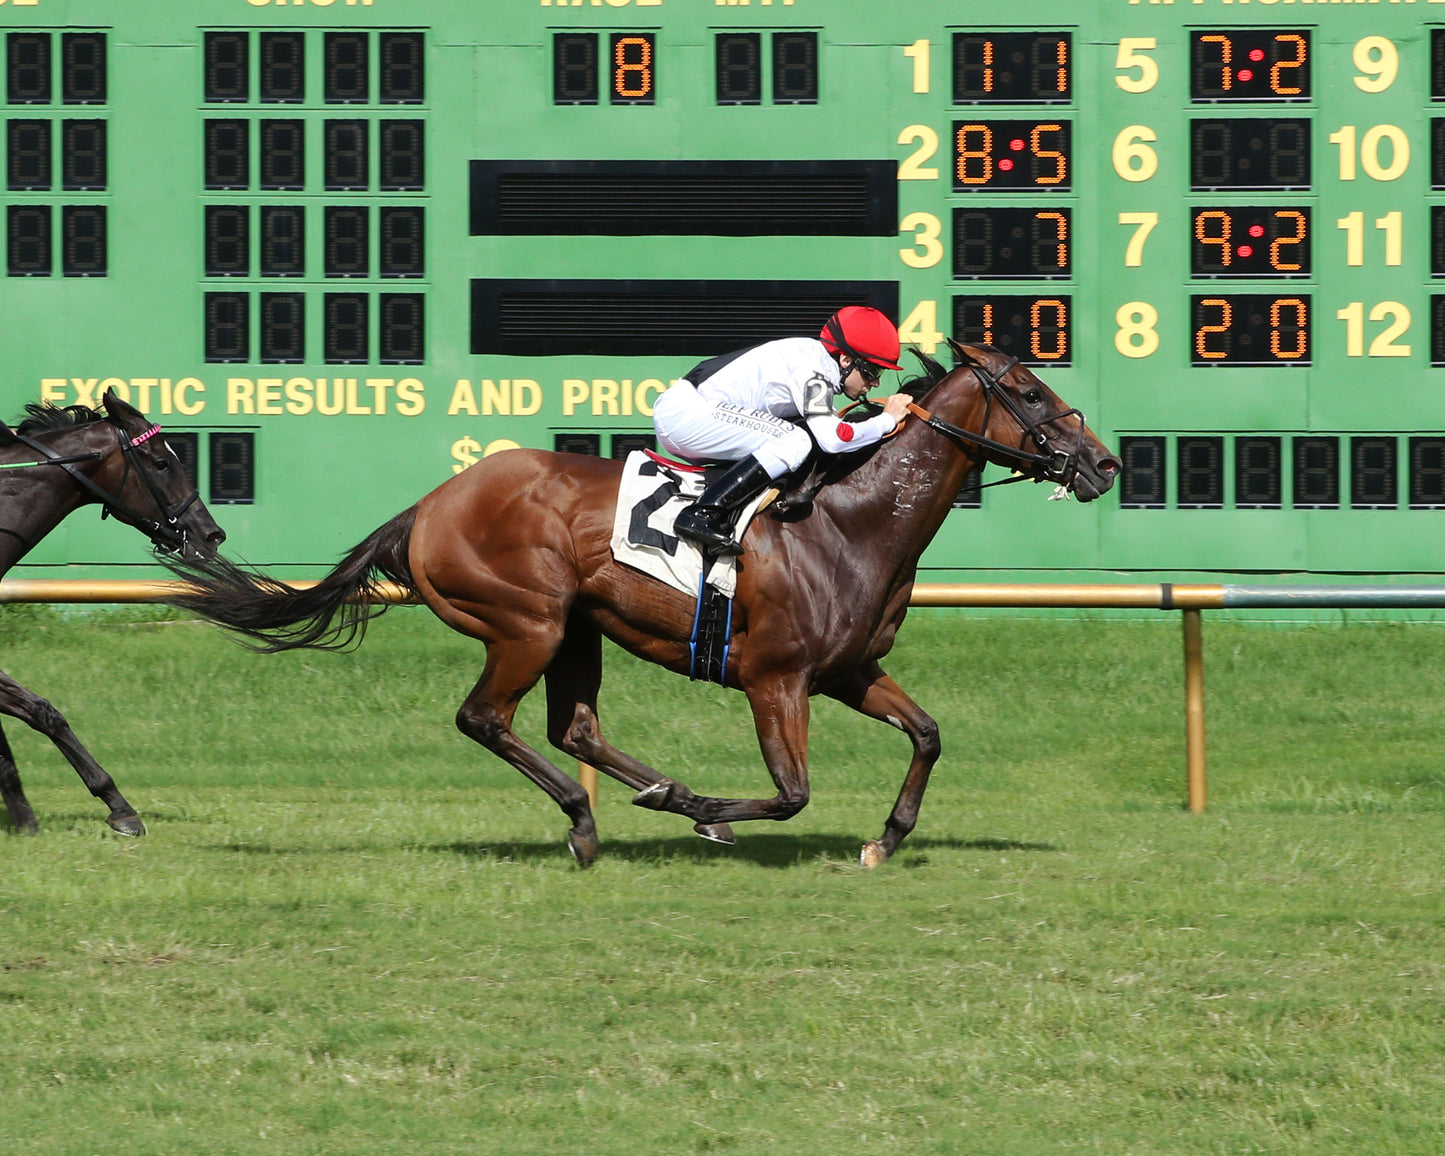 INTO MYSTIC - Kentucky Downs Preview Ladies Sprint - 2nd Running - 08-02-20 - R08 - ELP - Finish 01